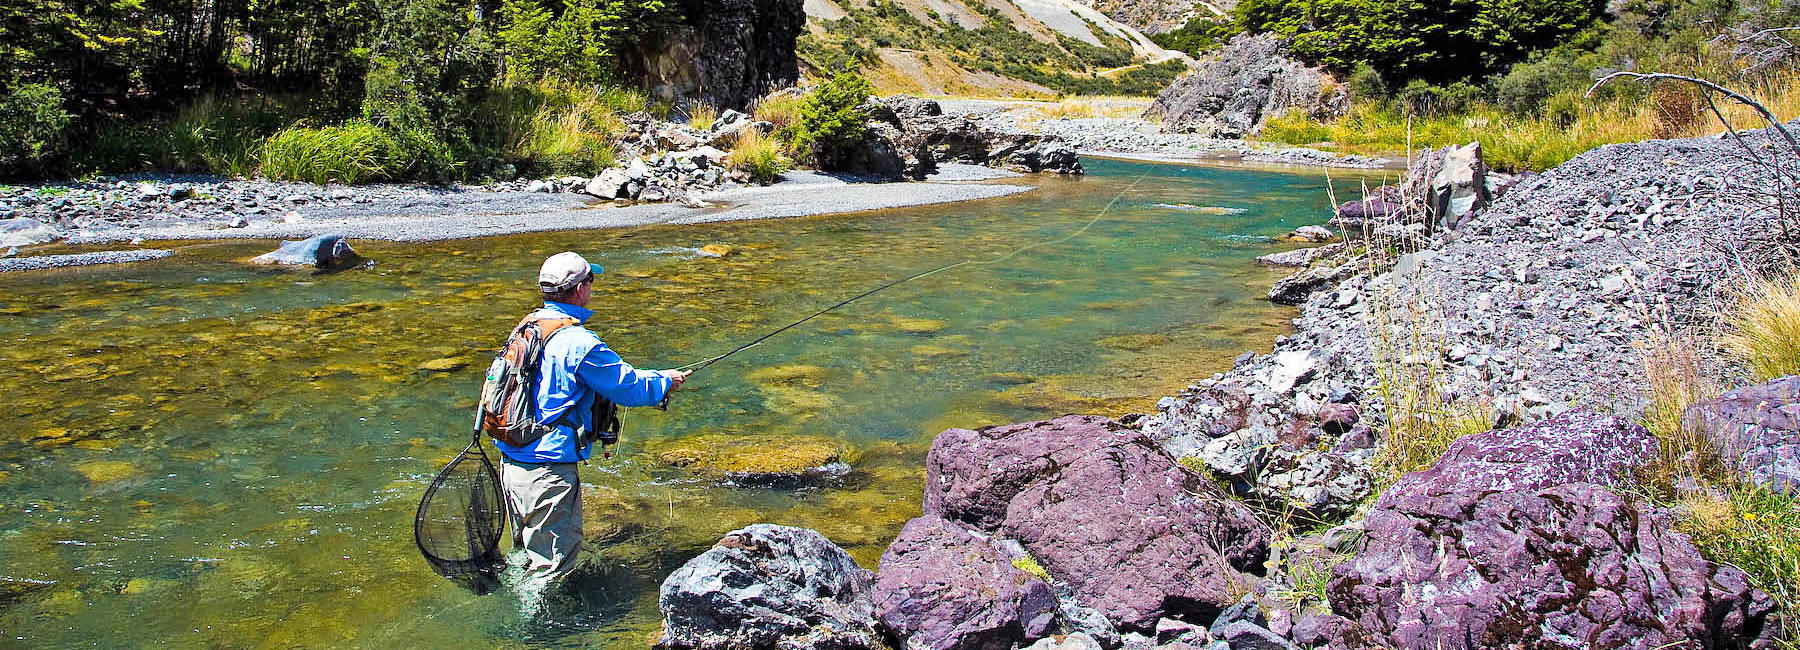 What To Wear Under Waders In Summer - Fly Fishing Fix